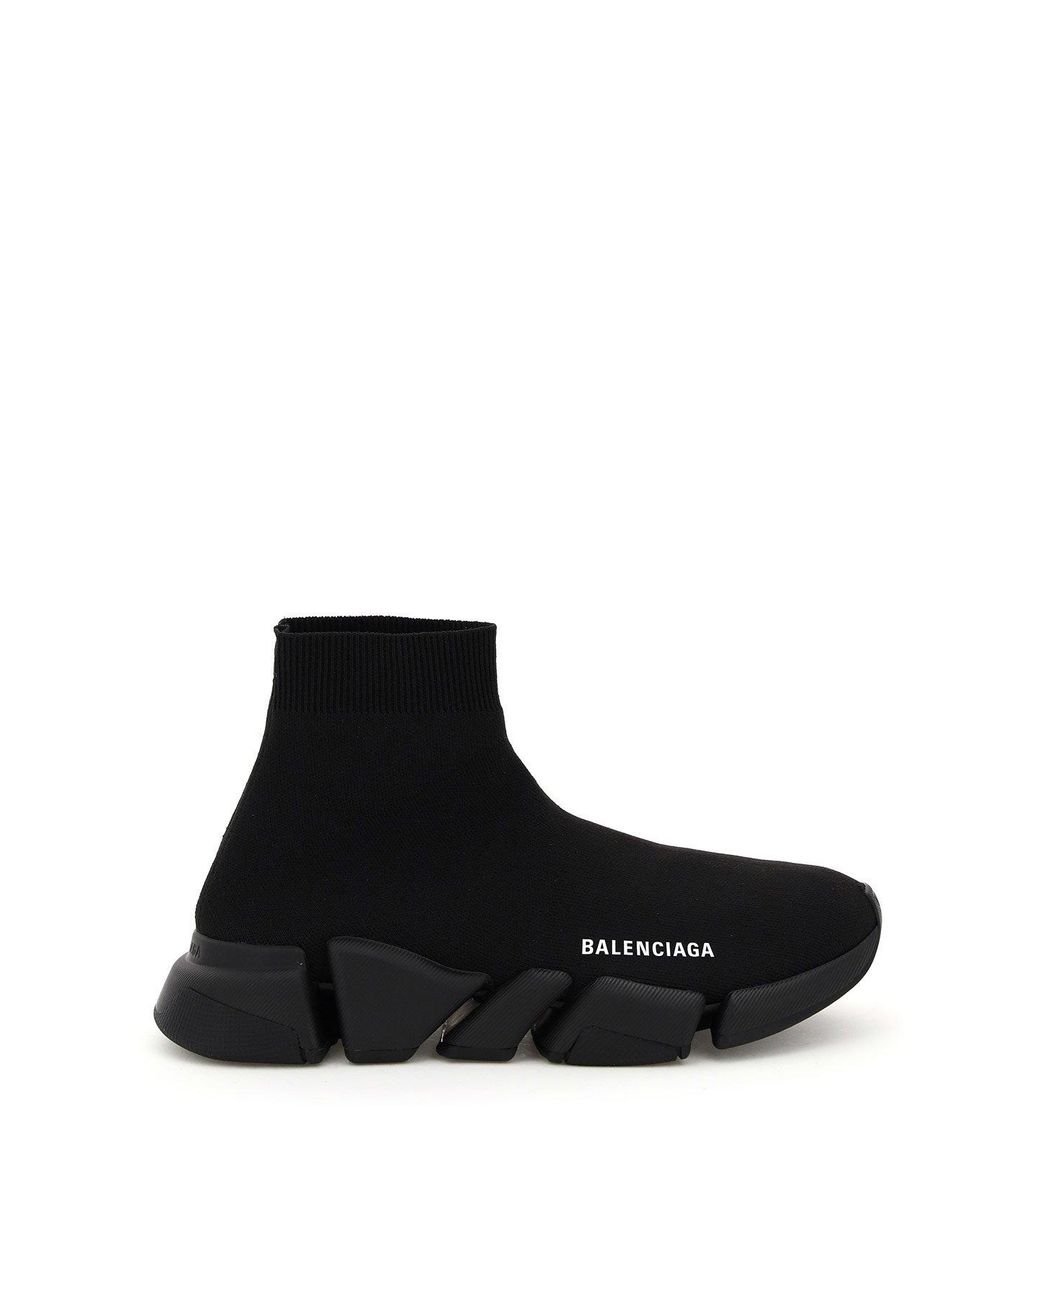 Balenciaga Stretch Knit Speed Sneakers in Black - Lyst